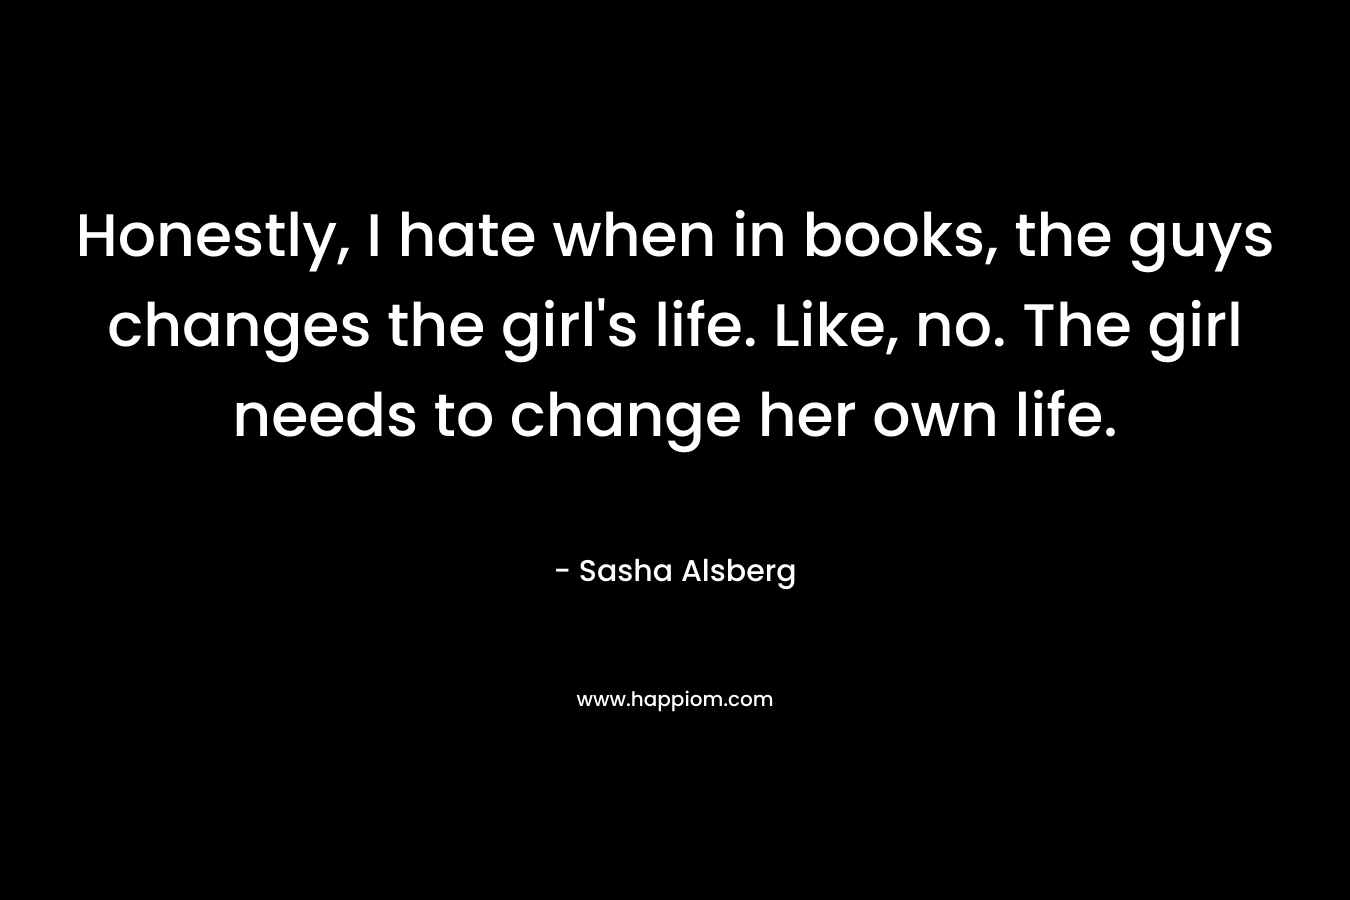 Honestly, I hate when in books, the guys changes the girl's life. Like, no. The girl needs to change her own life.